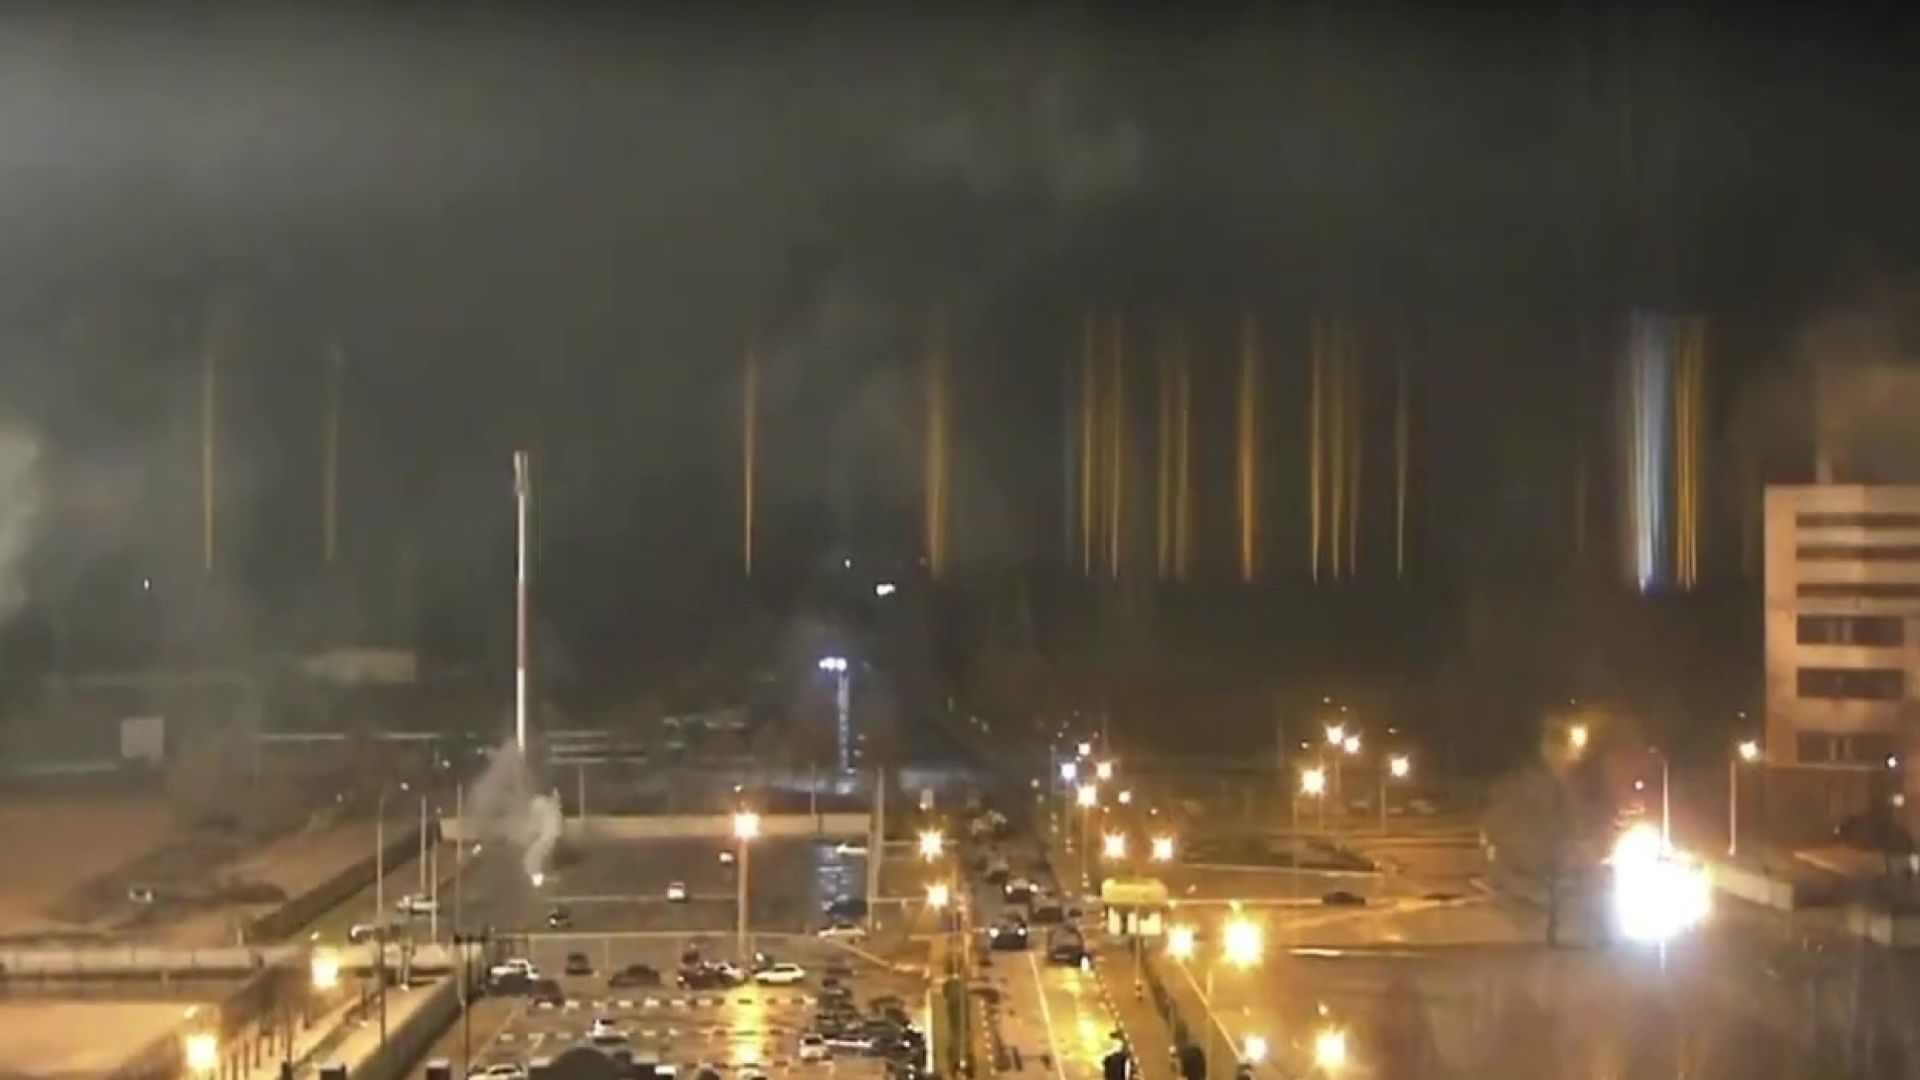 A screen grab captured from a video shows a view of Zaporizhzhia nuclear power plant.